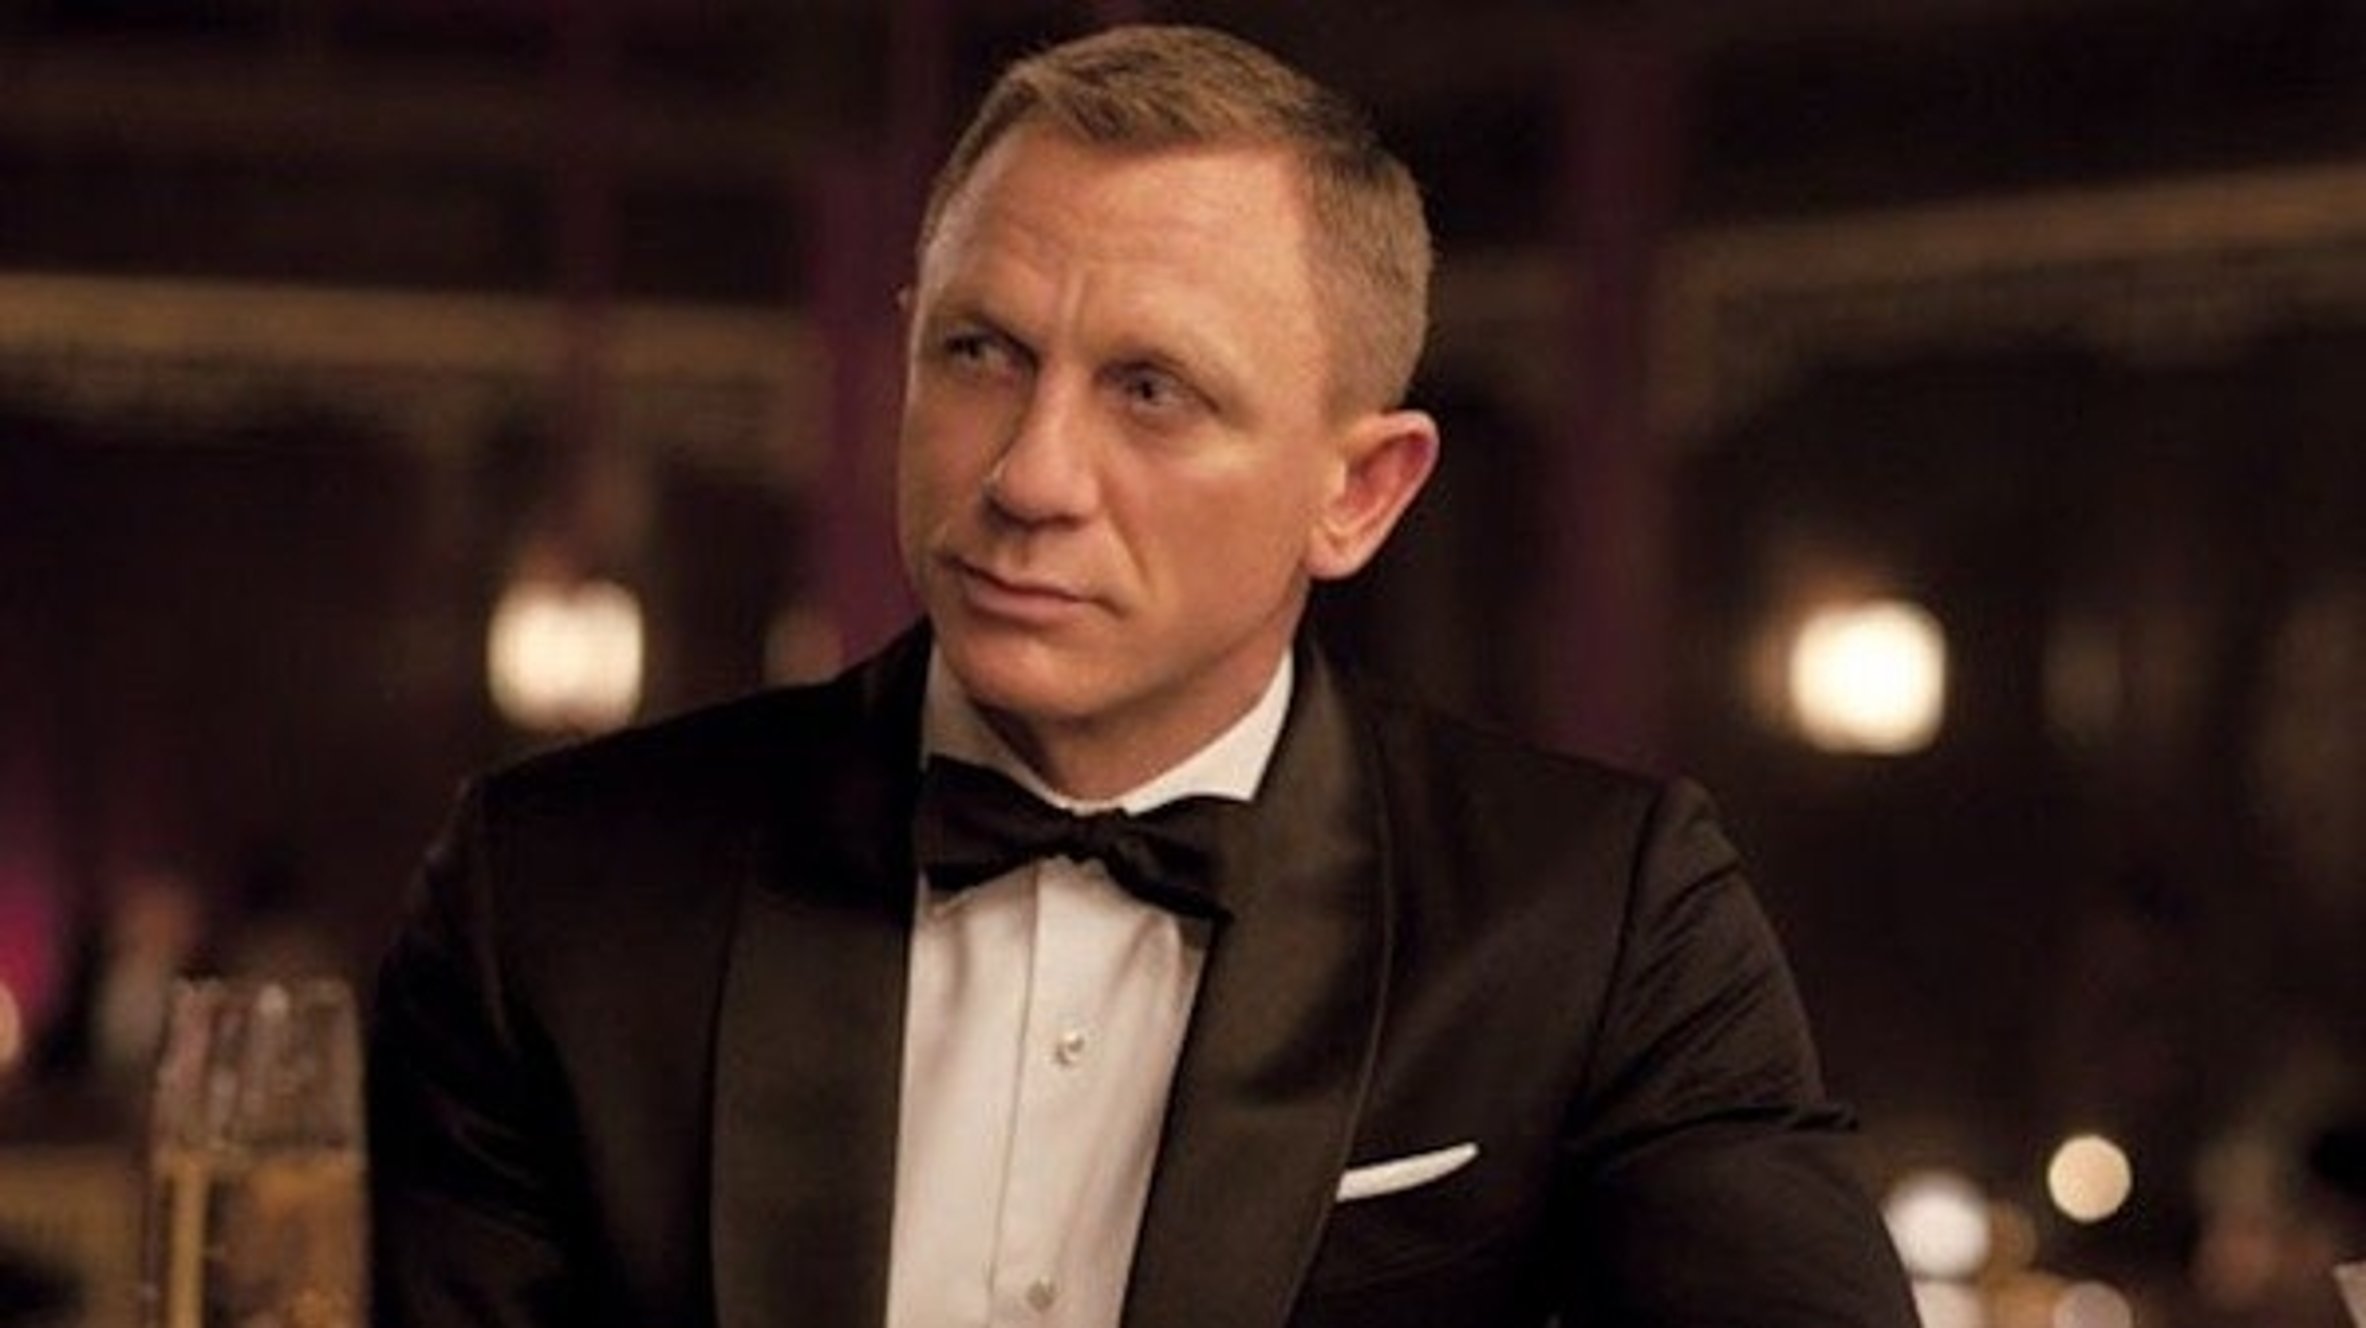 No Time To Die Director Discusses How He Tried To Modernize The Story For Daniel Craig's Final Outing.